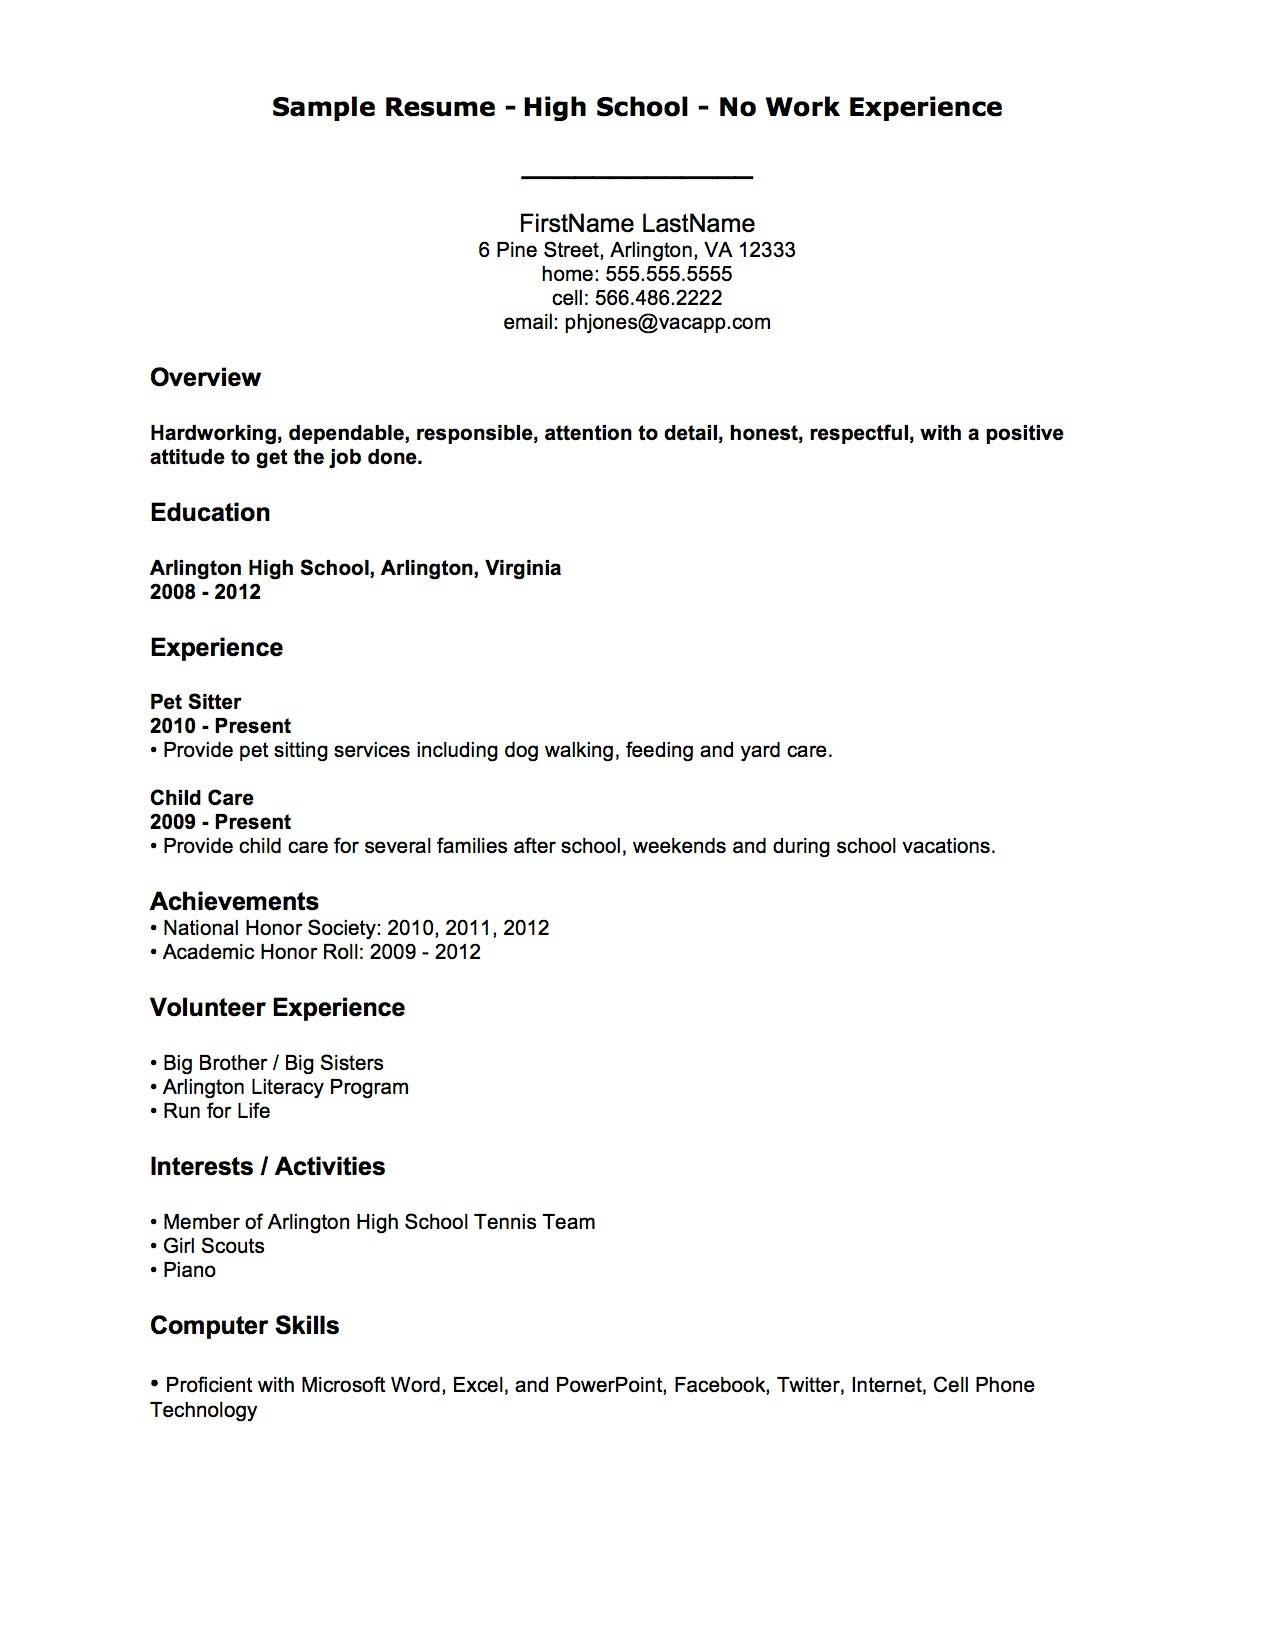 Resume Samples for It Jobs Experienced Resume Examples with Little Experience